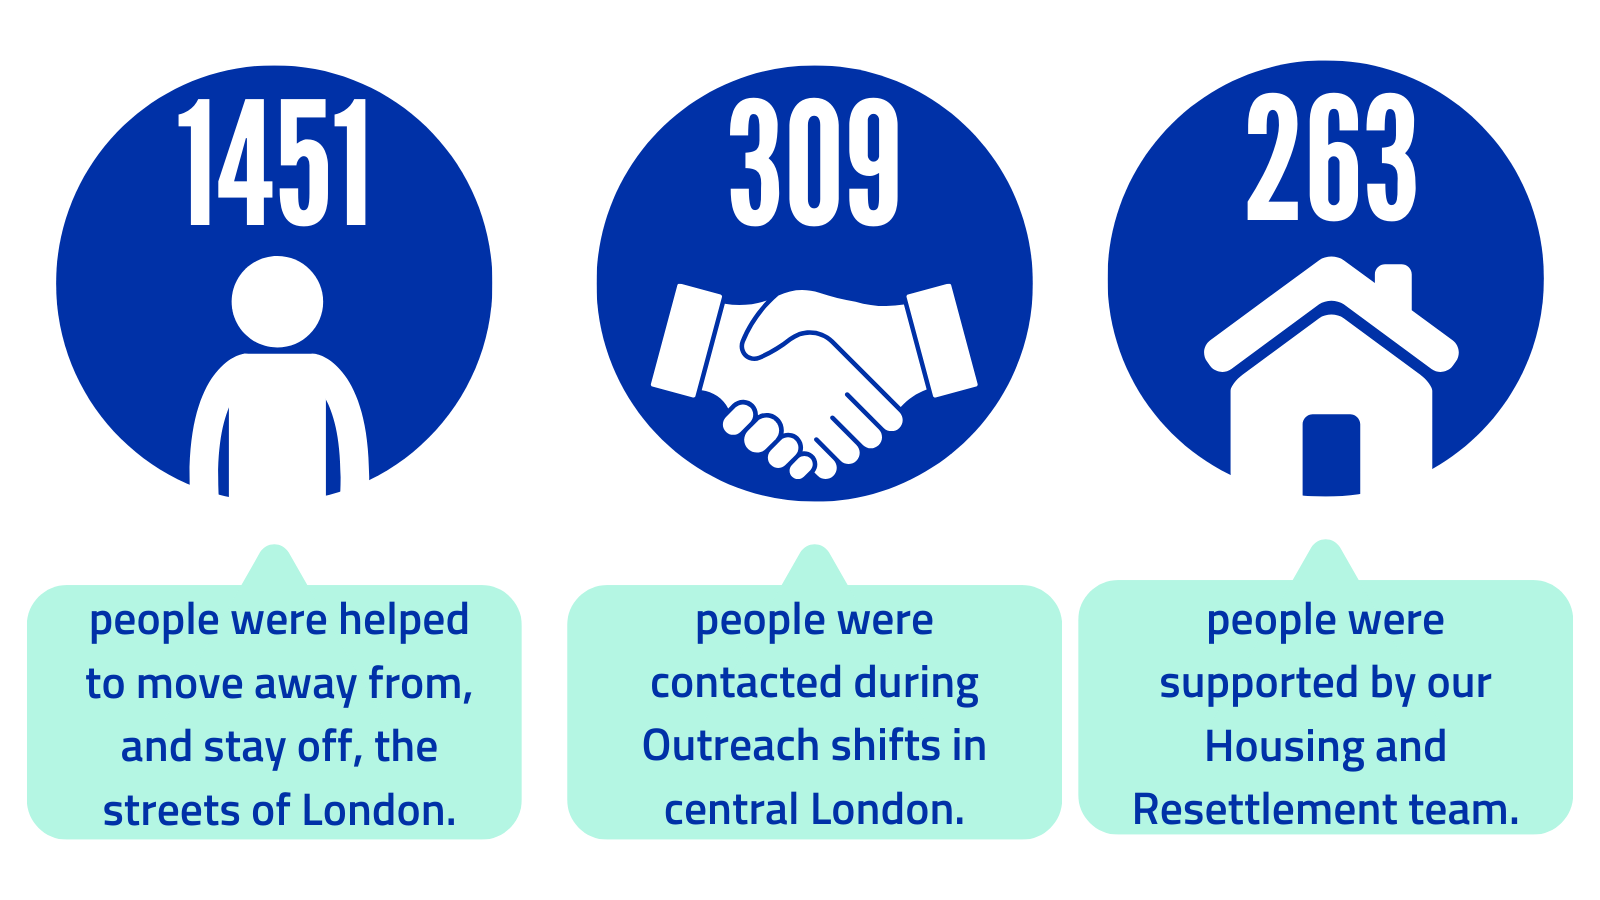 statistics highlighting what we achieved in our work for people sleeping rough in 2023. This includes supporting over 1000 people across the year.